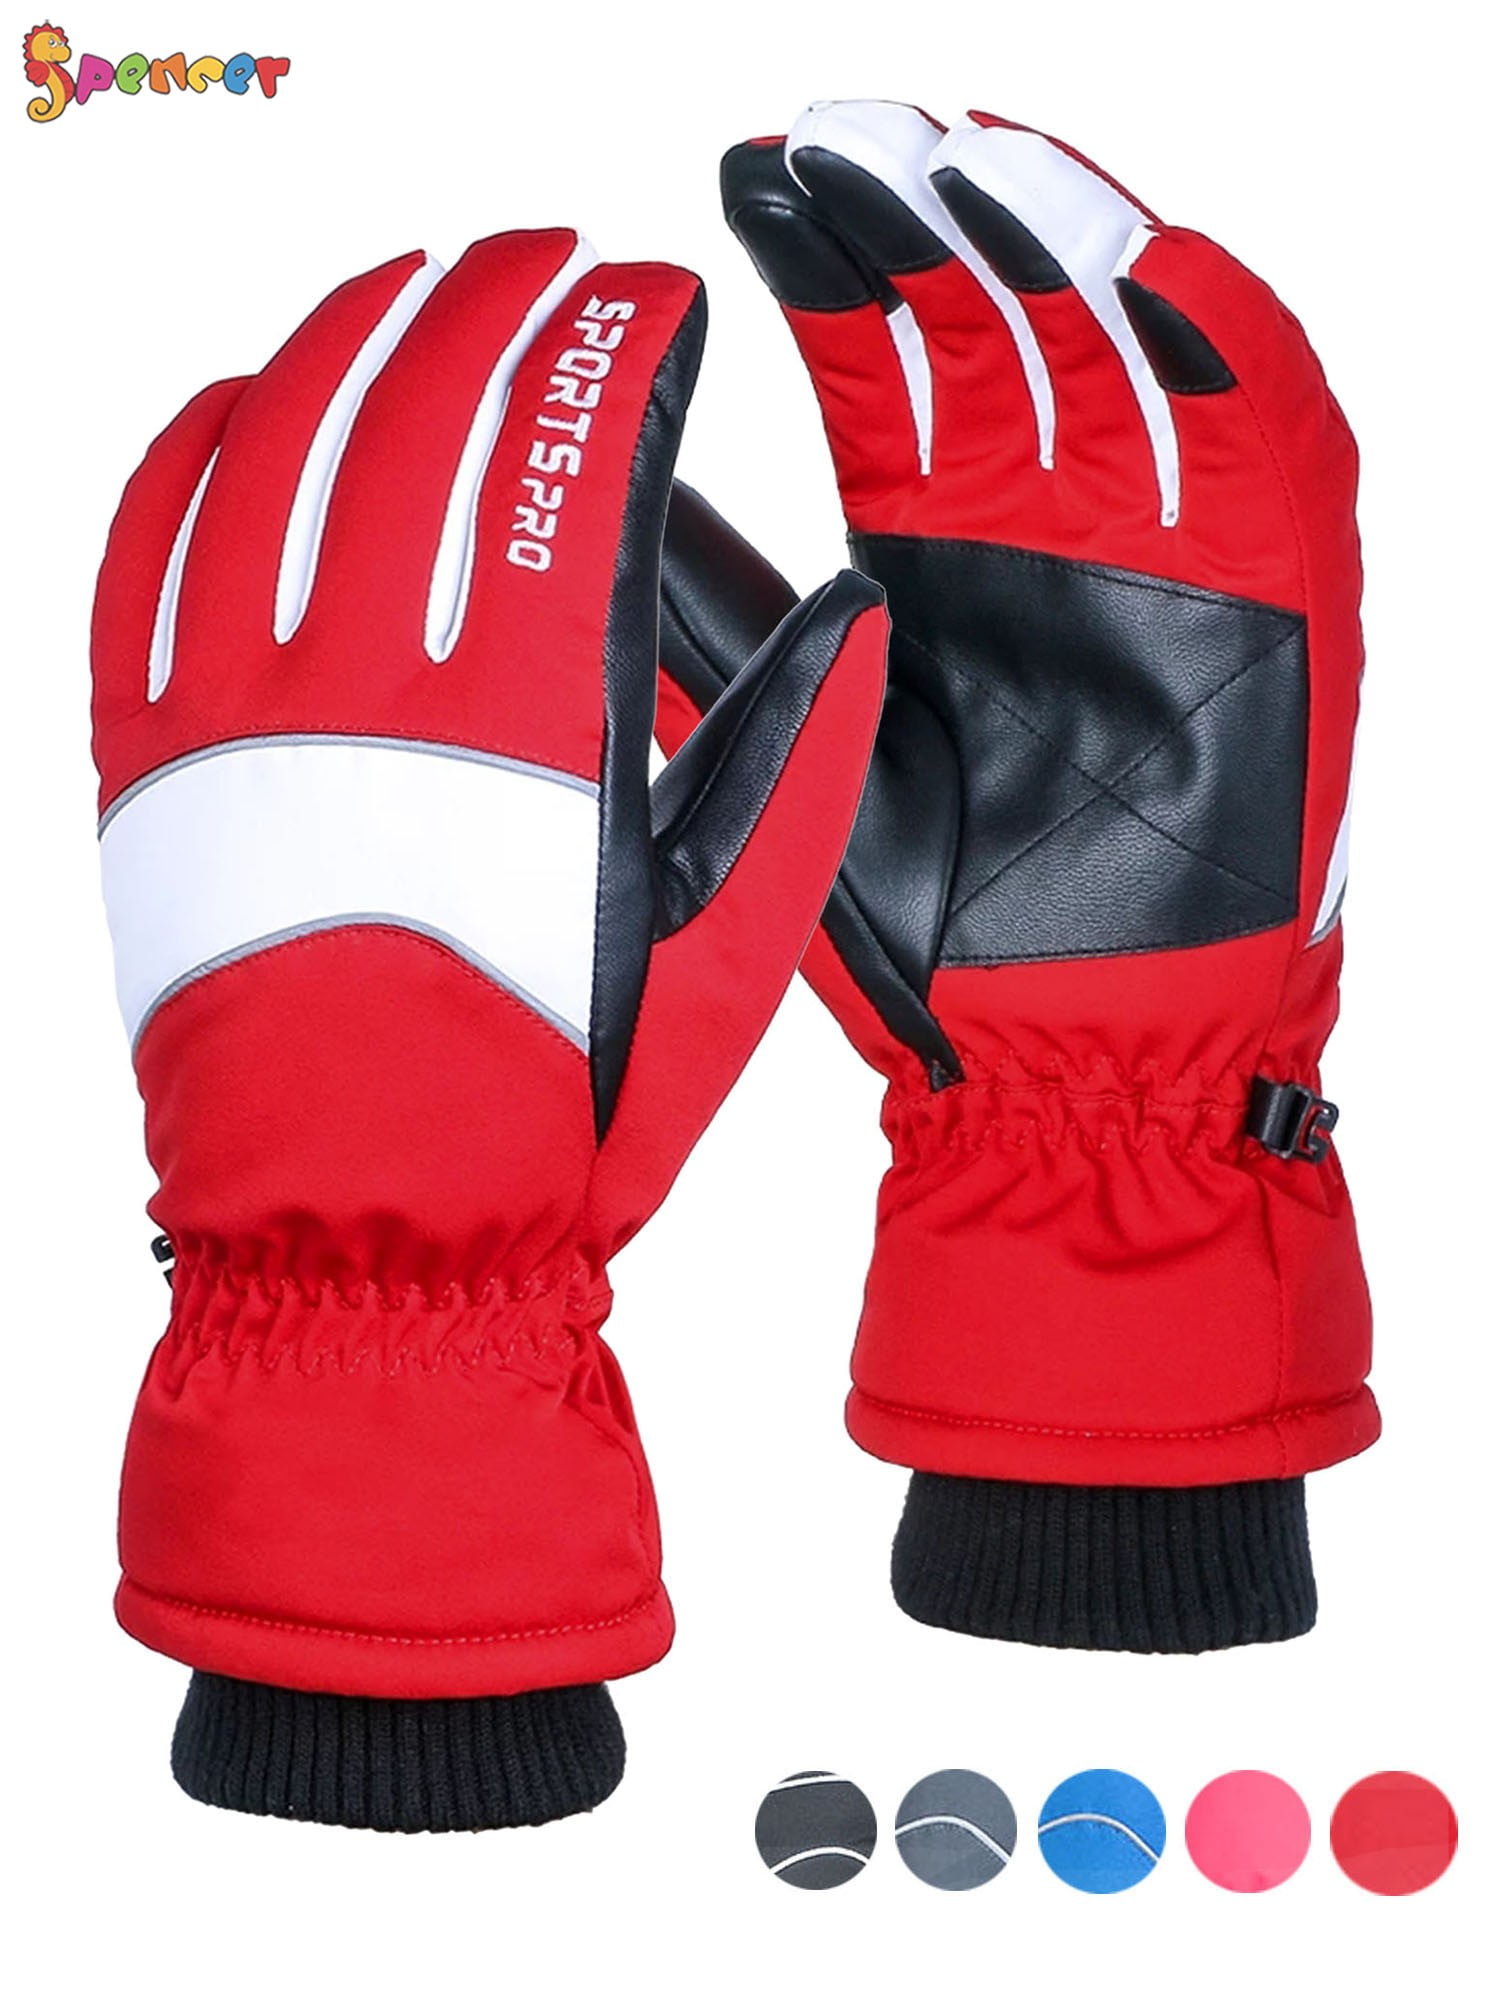 Ski Gloves Waterproof Cold-proof for Snow Gloves for Skiing Snowboarding